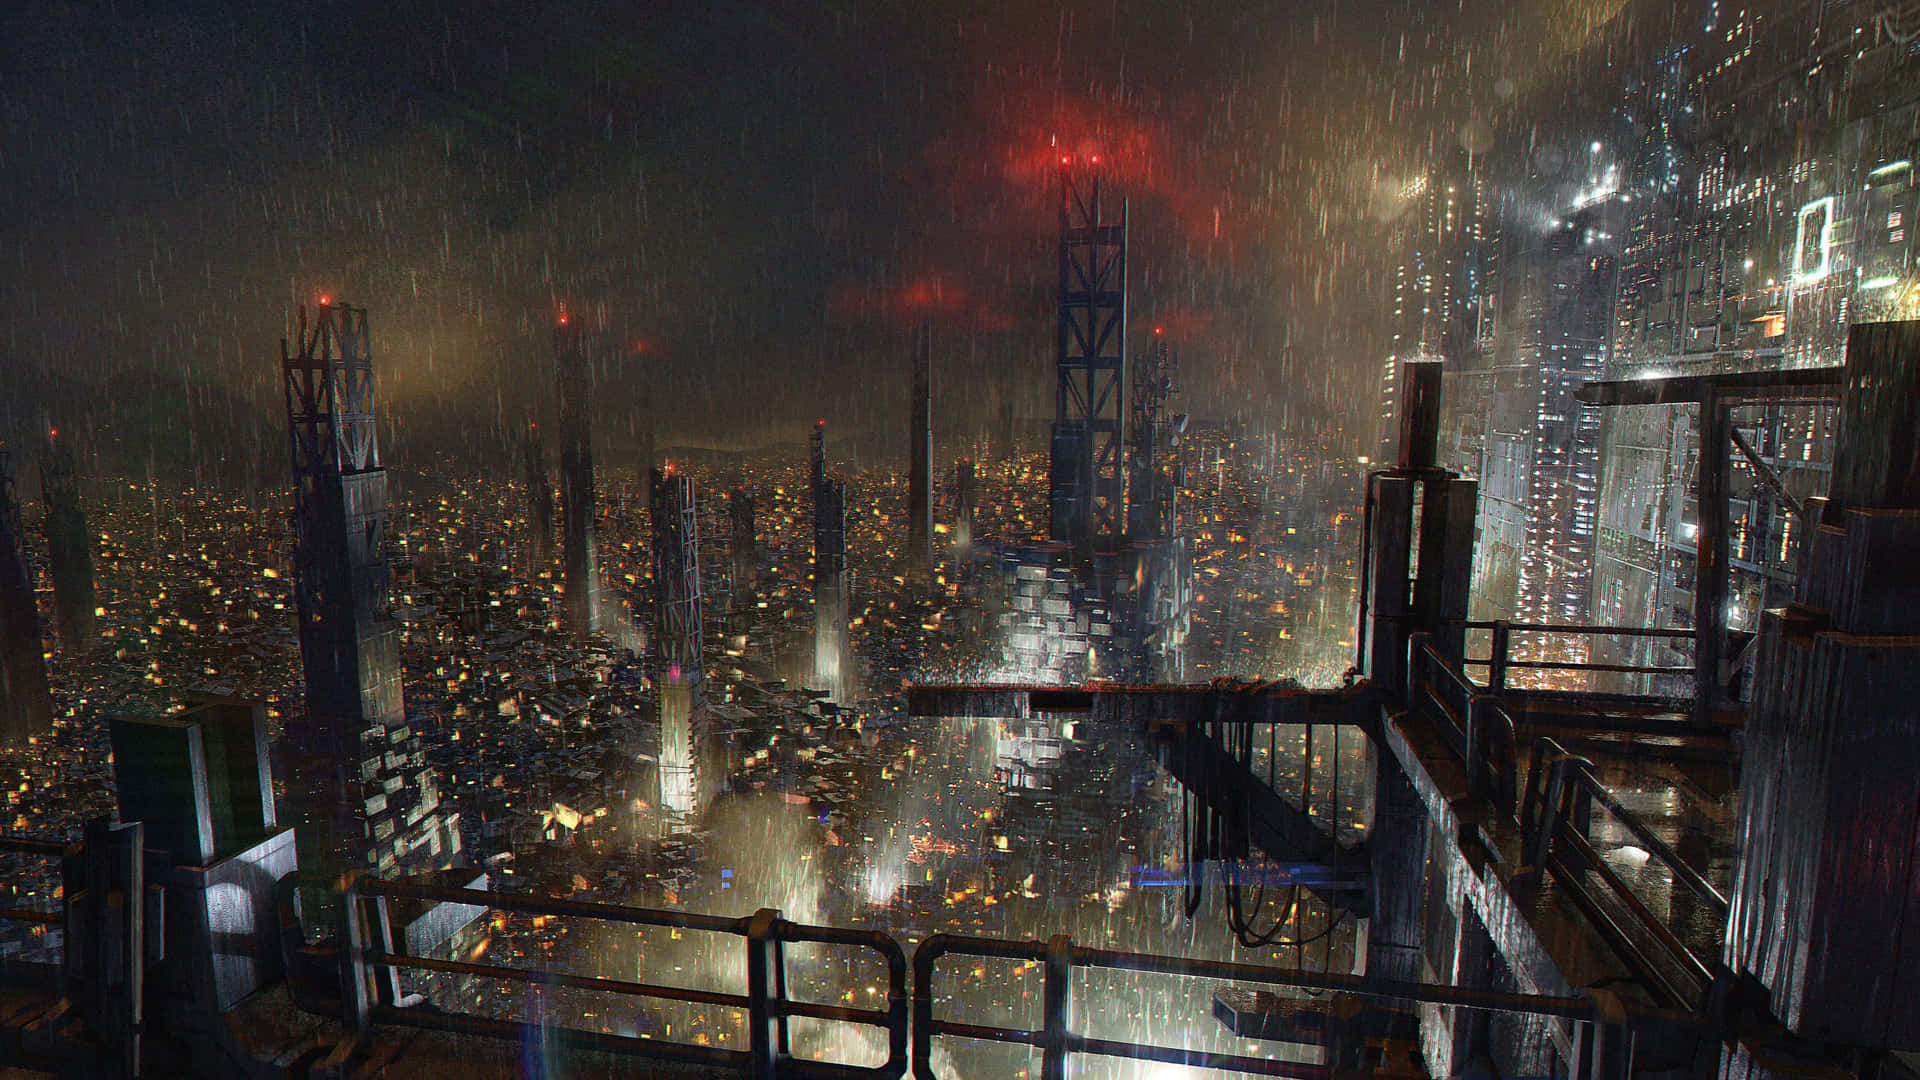 Mankind Divided City View Night Wallpaper